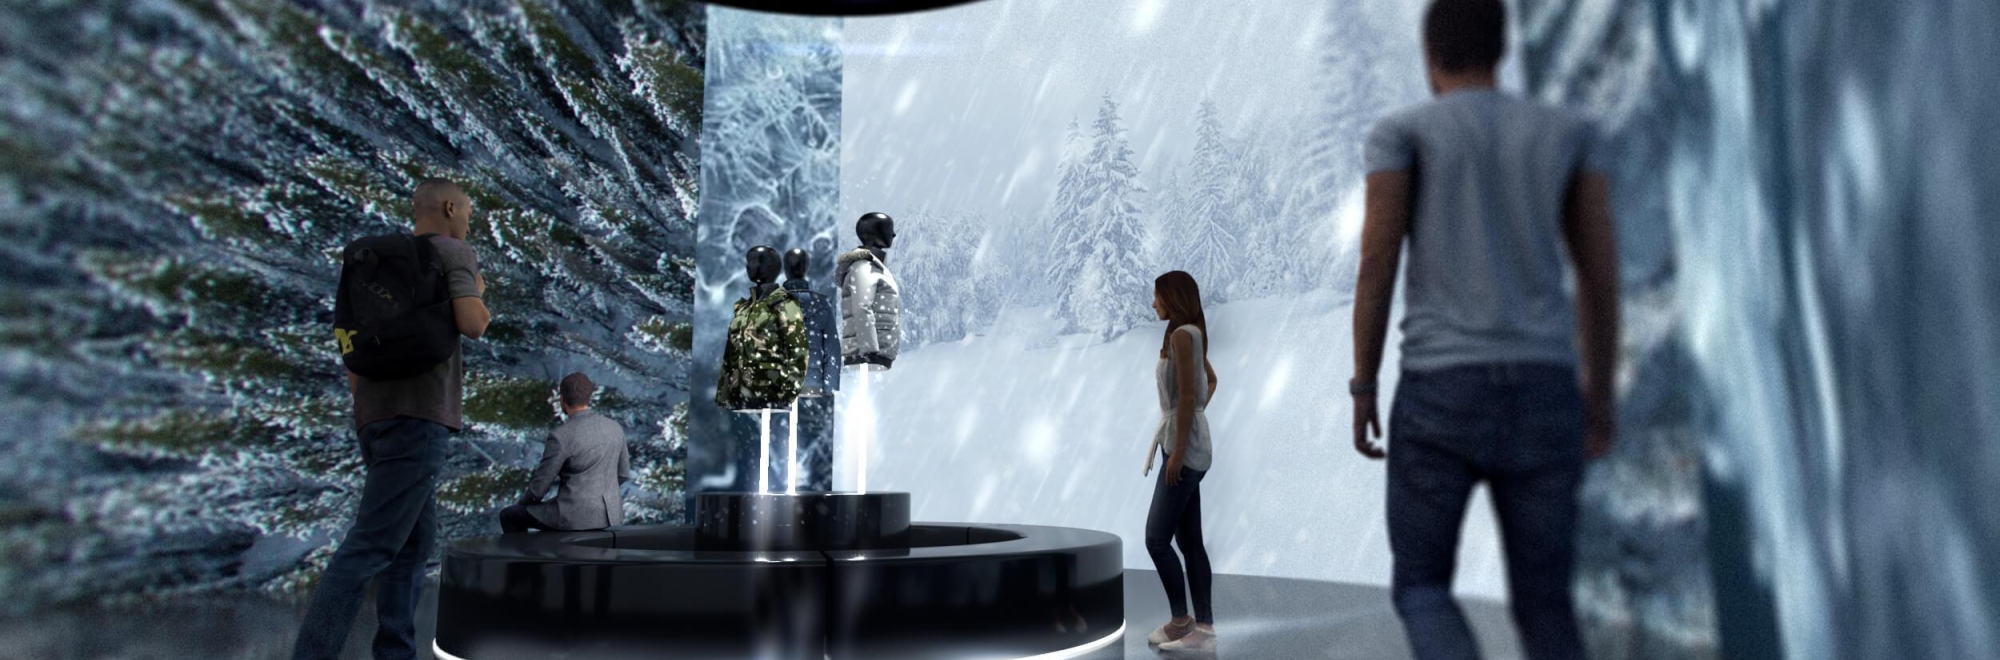 Canada Goose turns a regular shopping trip into an immersive experience